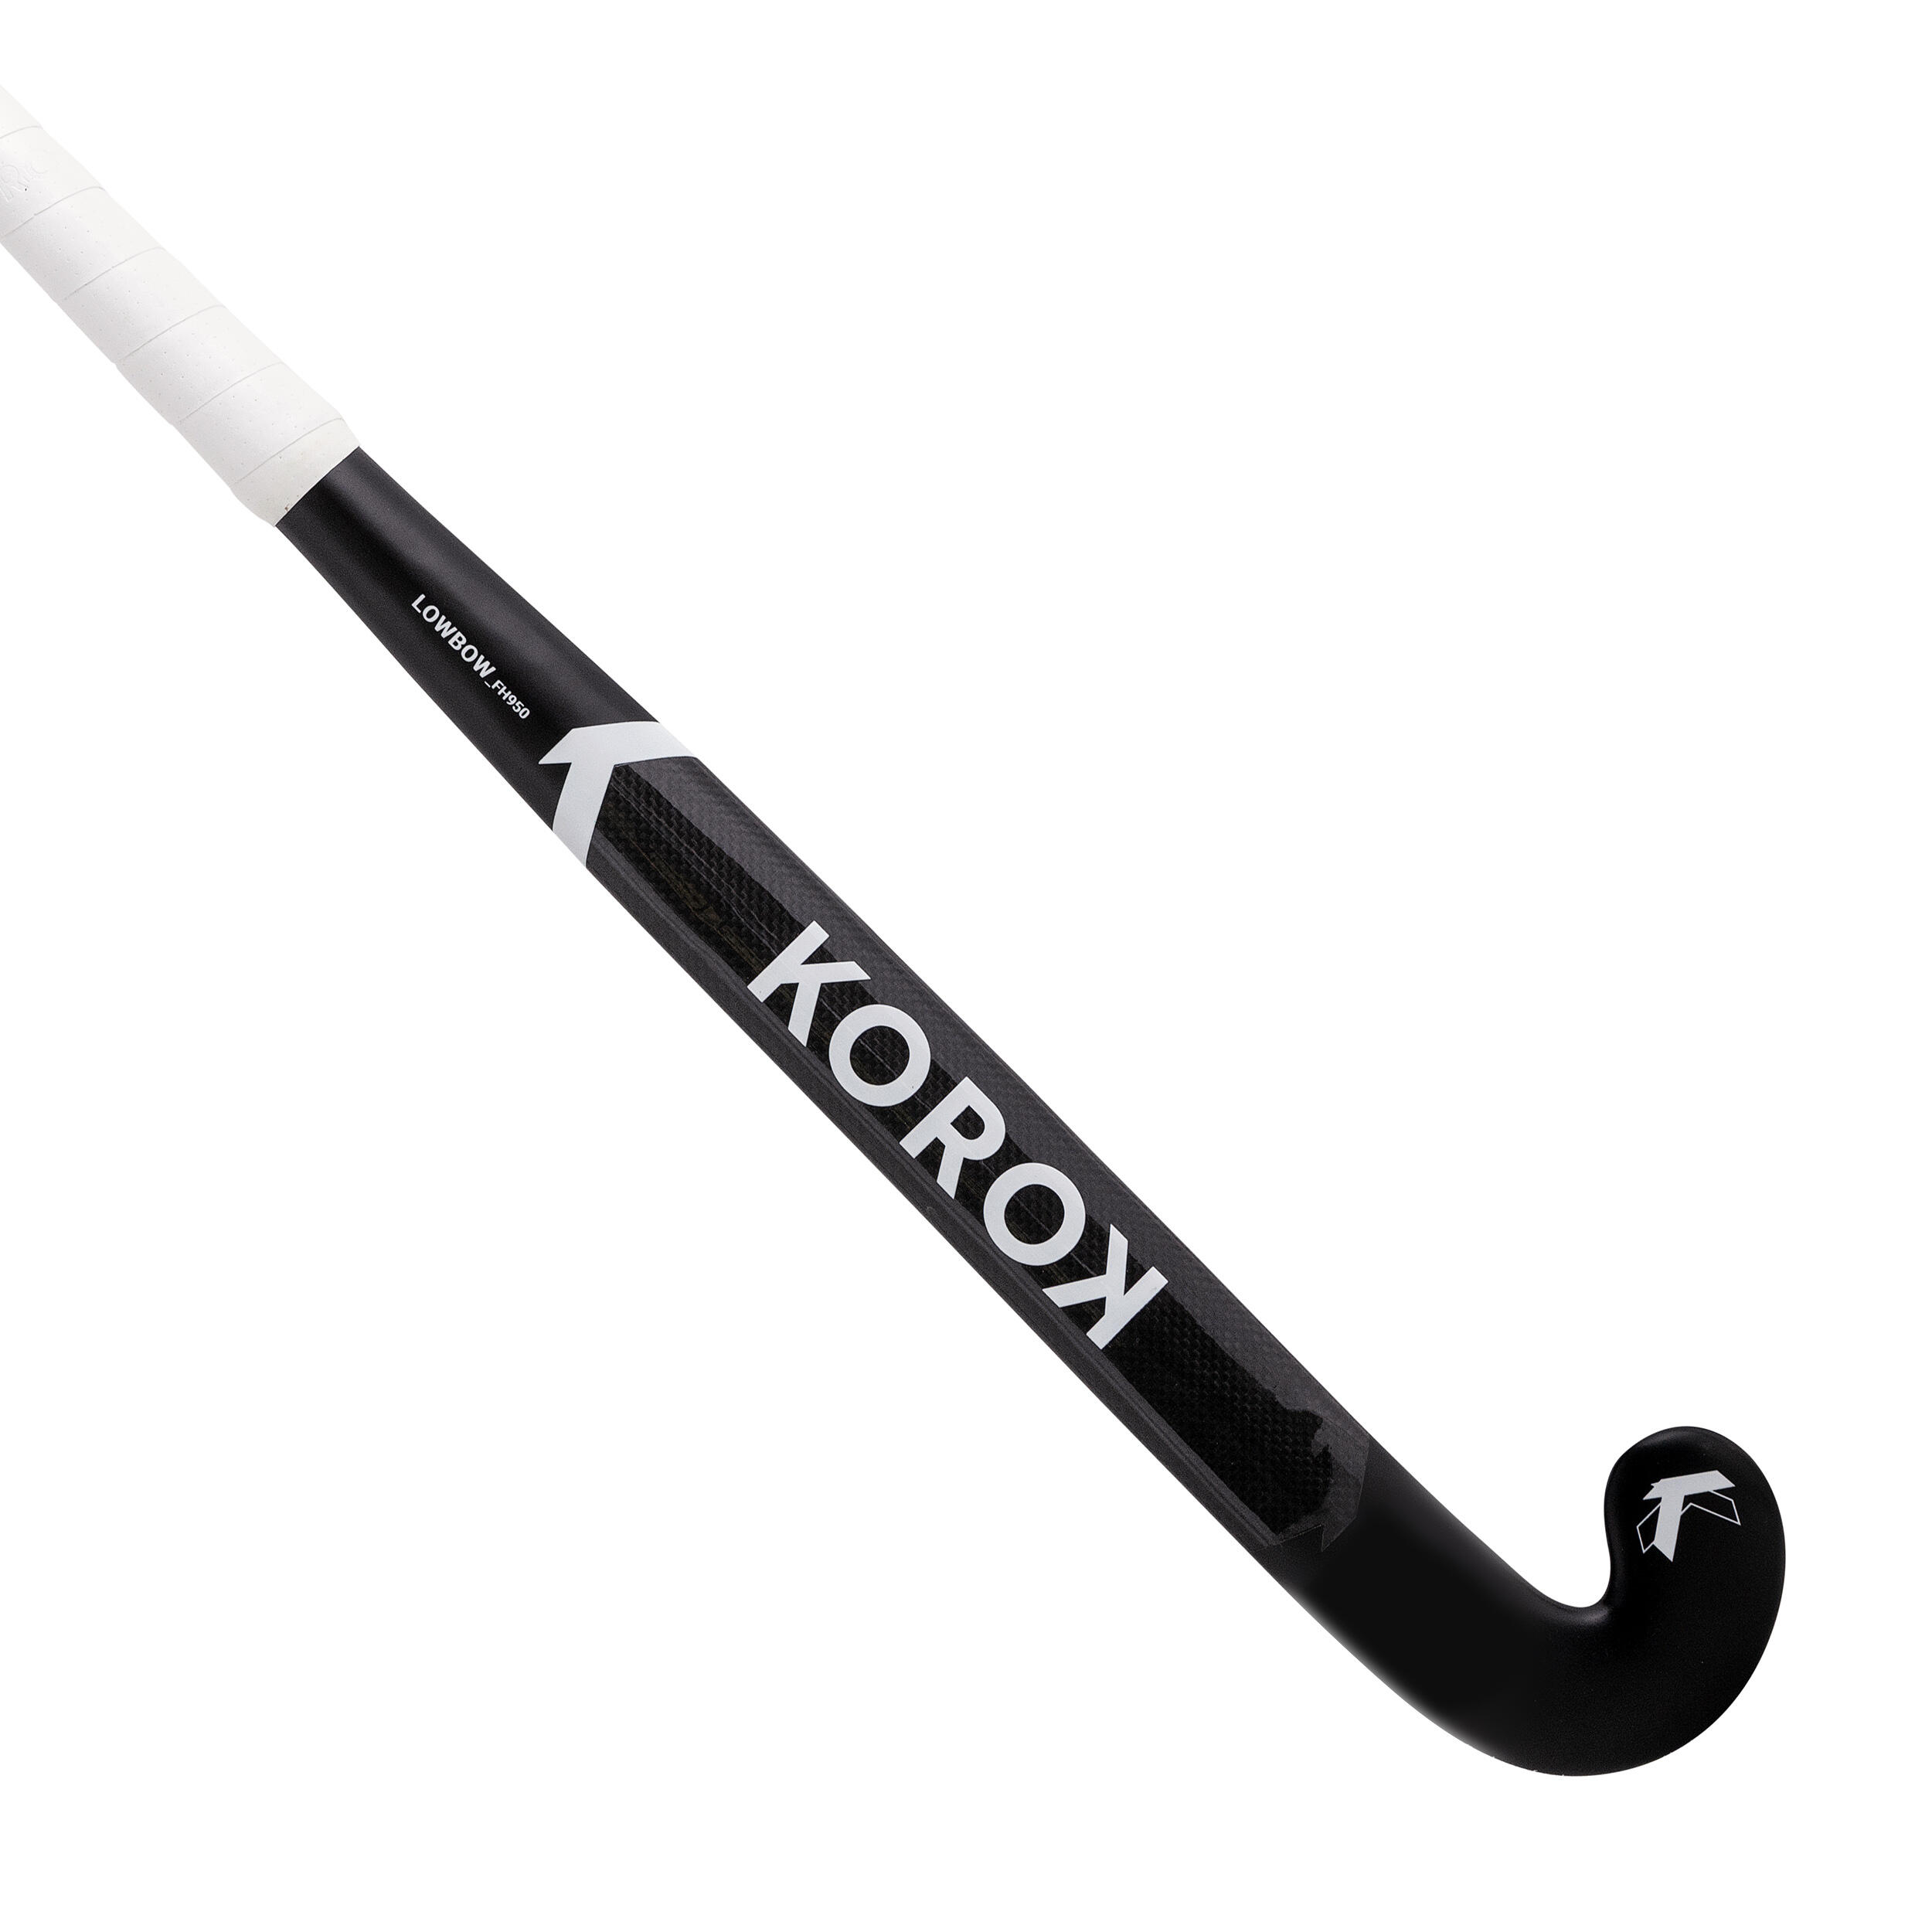 Adult Advanced 50% Carbon Low Bow Indoor Hockey Stick FH950 - Black/White 1/10